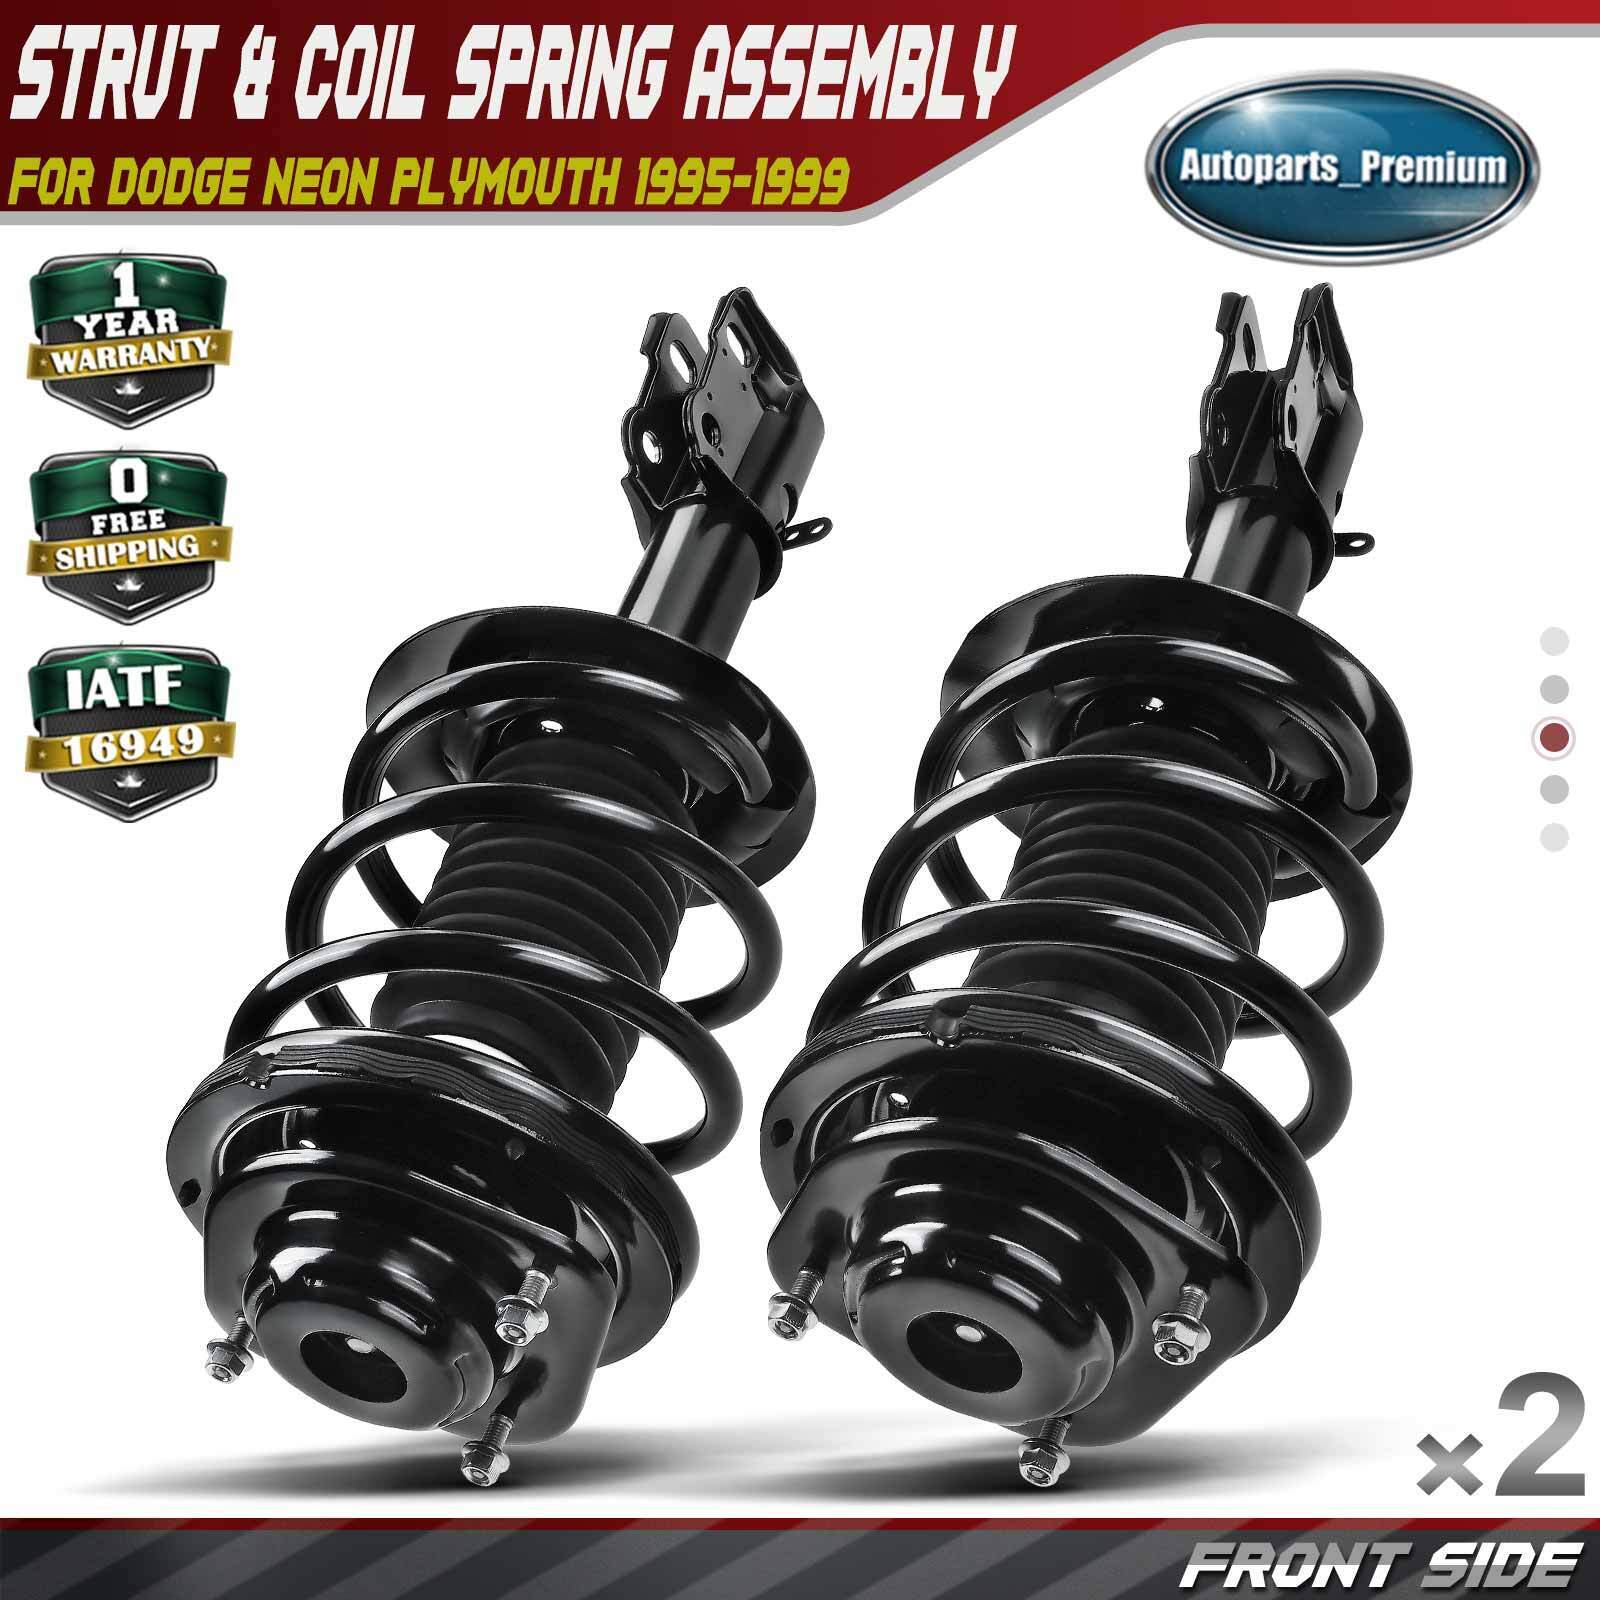 2x Front Complete Strut Coil Spring Assembly for Dodge Neon Plymouth 1995-1999